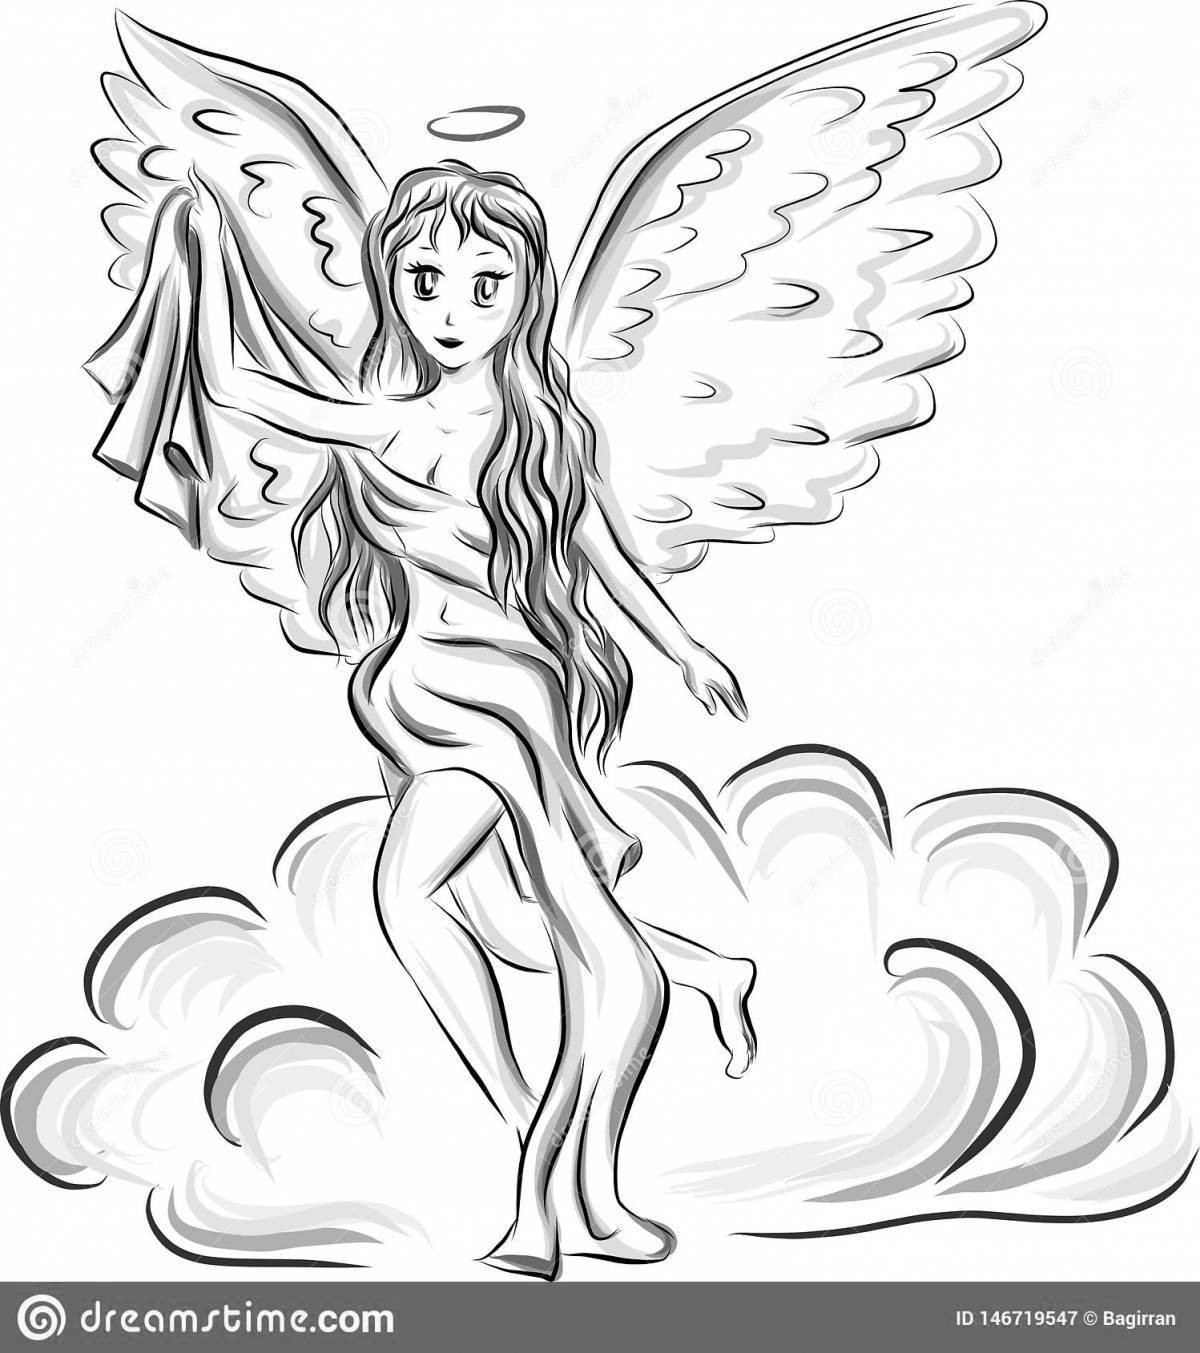 Divine coloring girl with wings